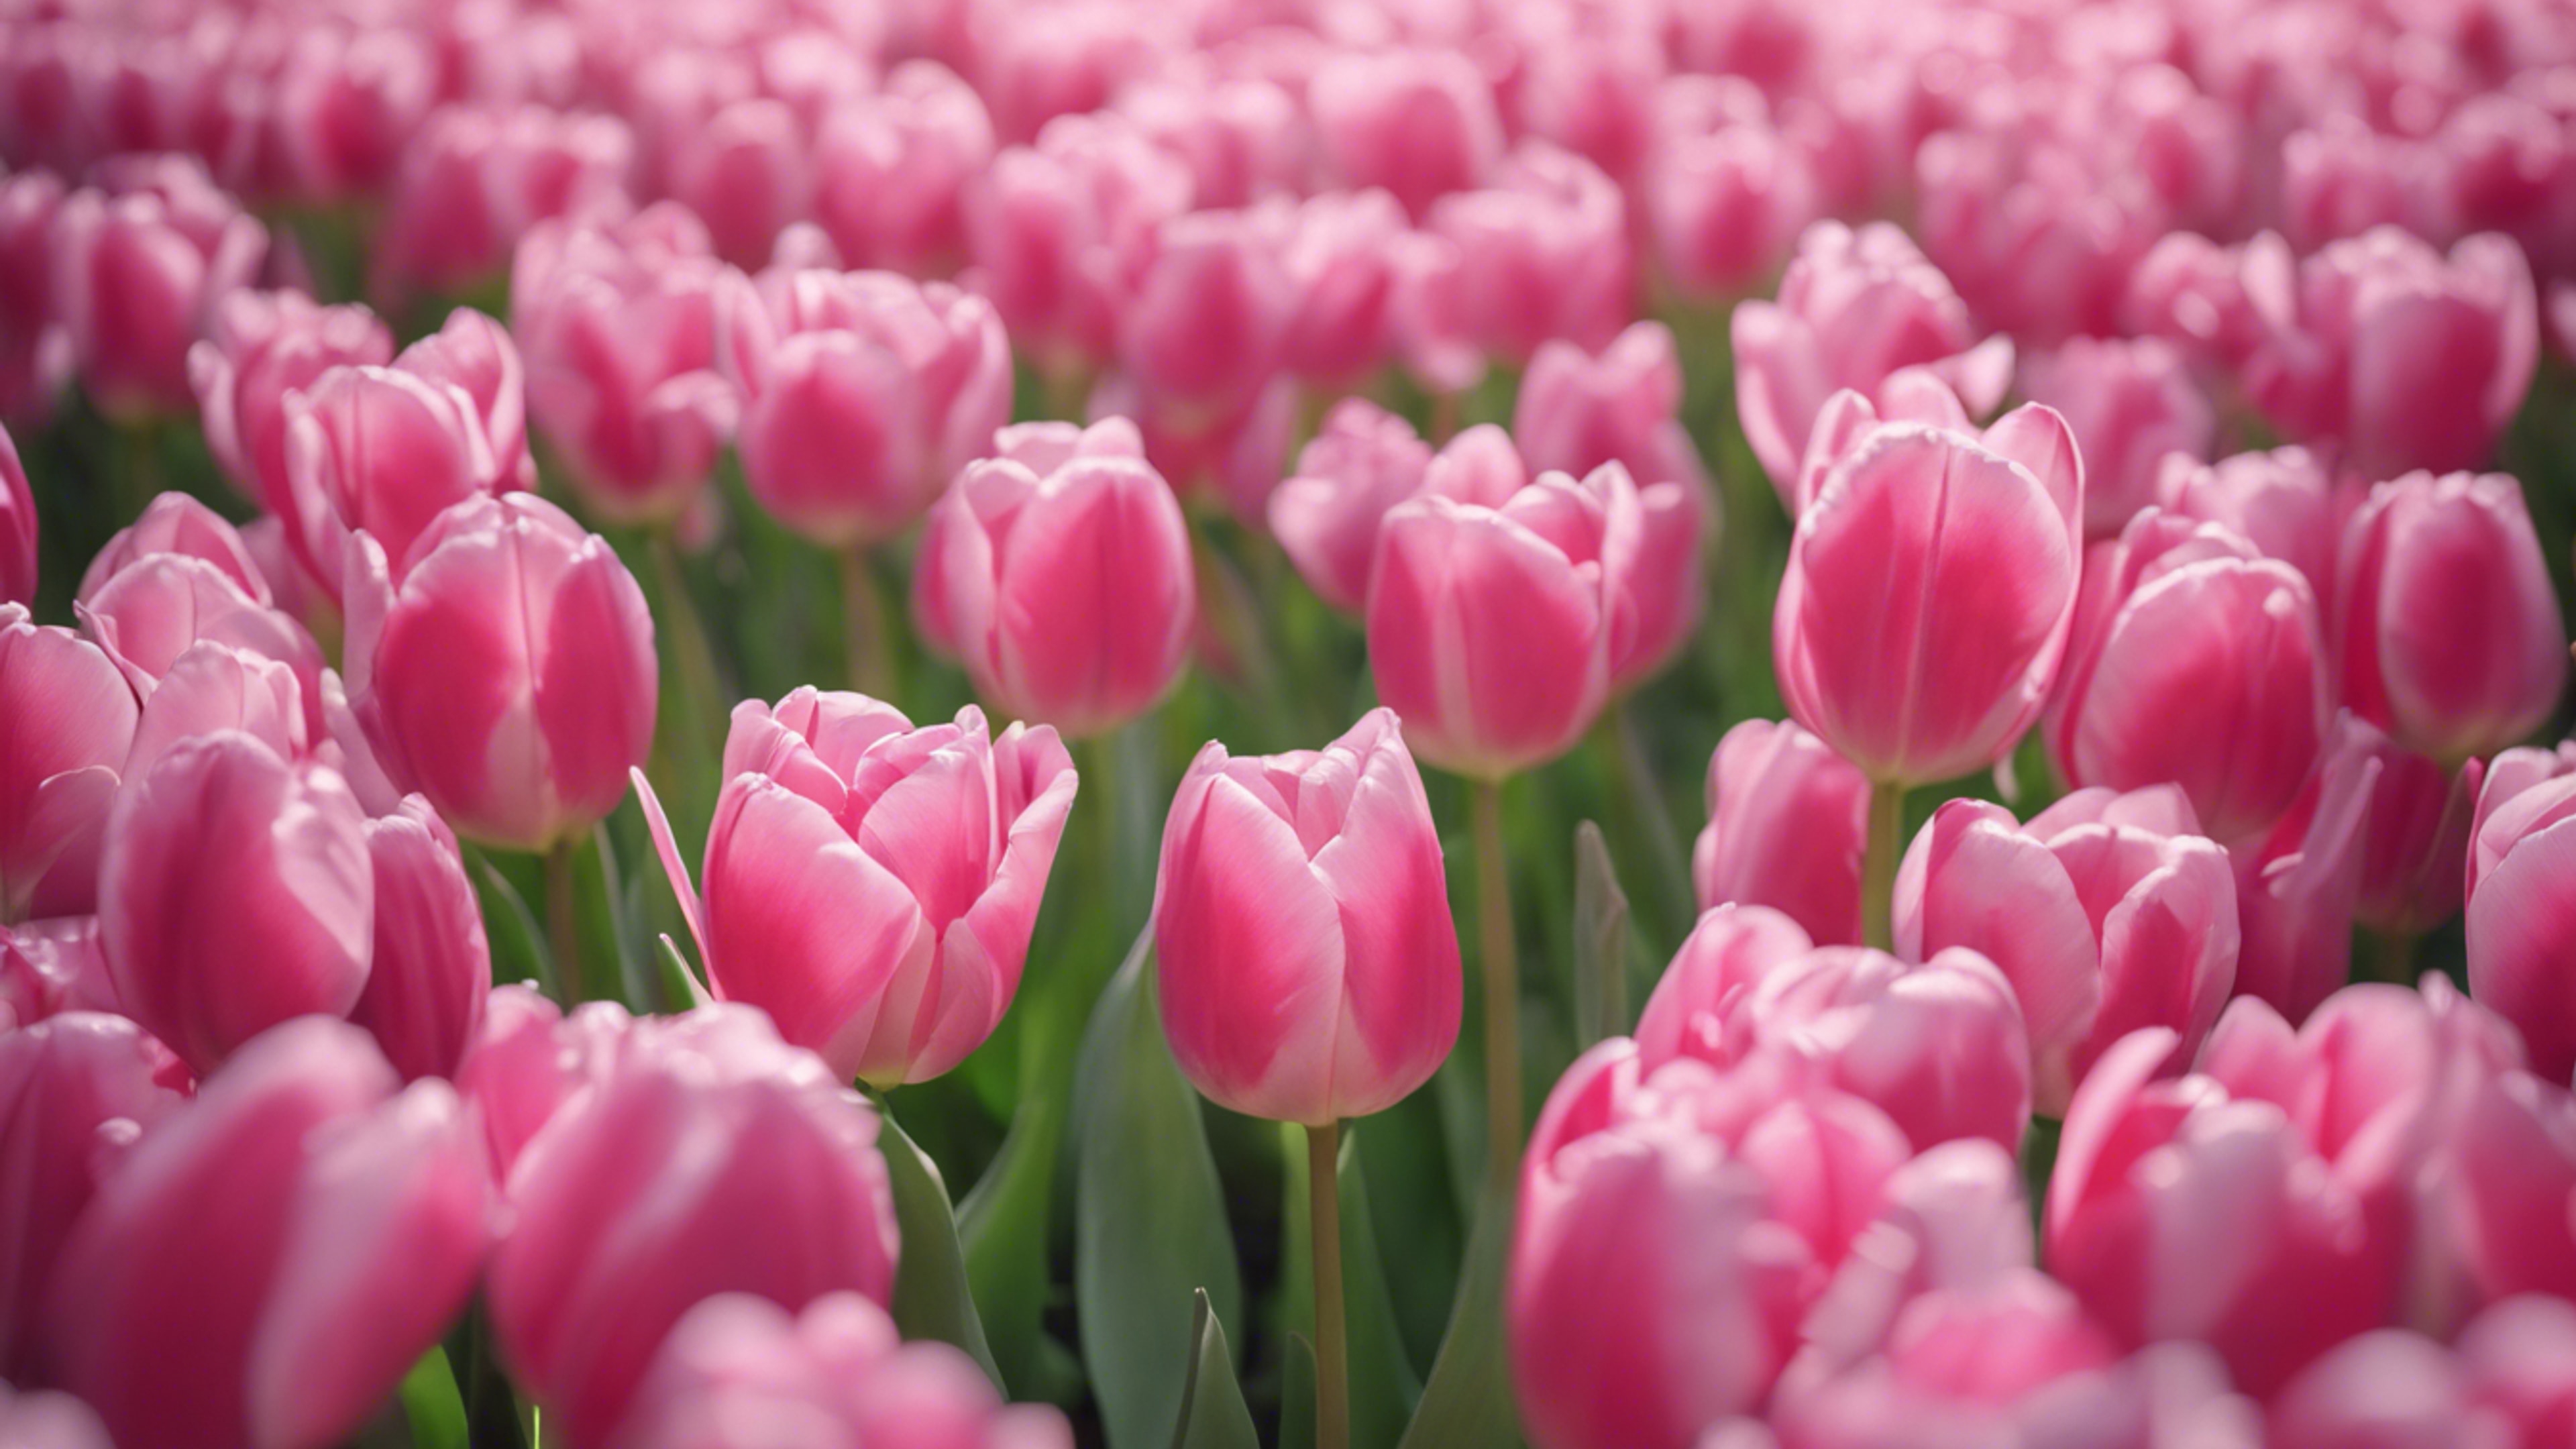 A group of pink tulips forming a perfect heart shape. Wallpaper[03142173a34943bc92d4]